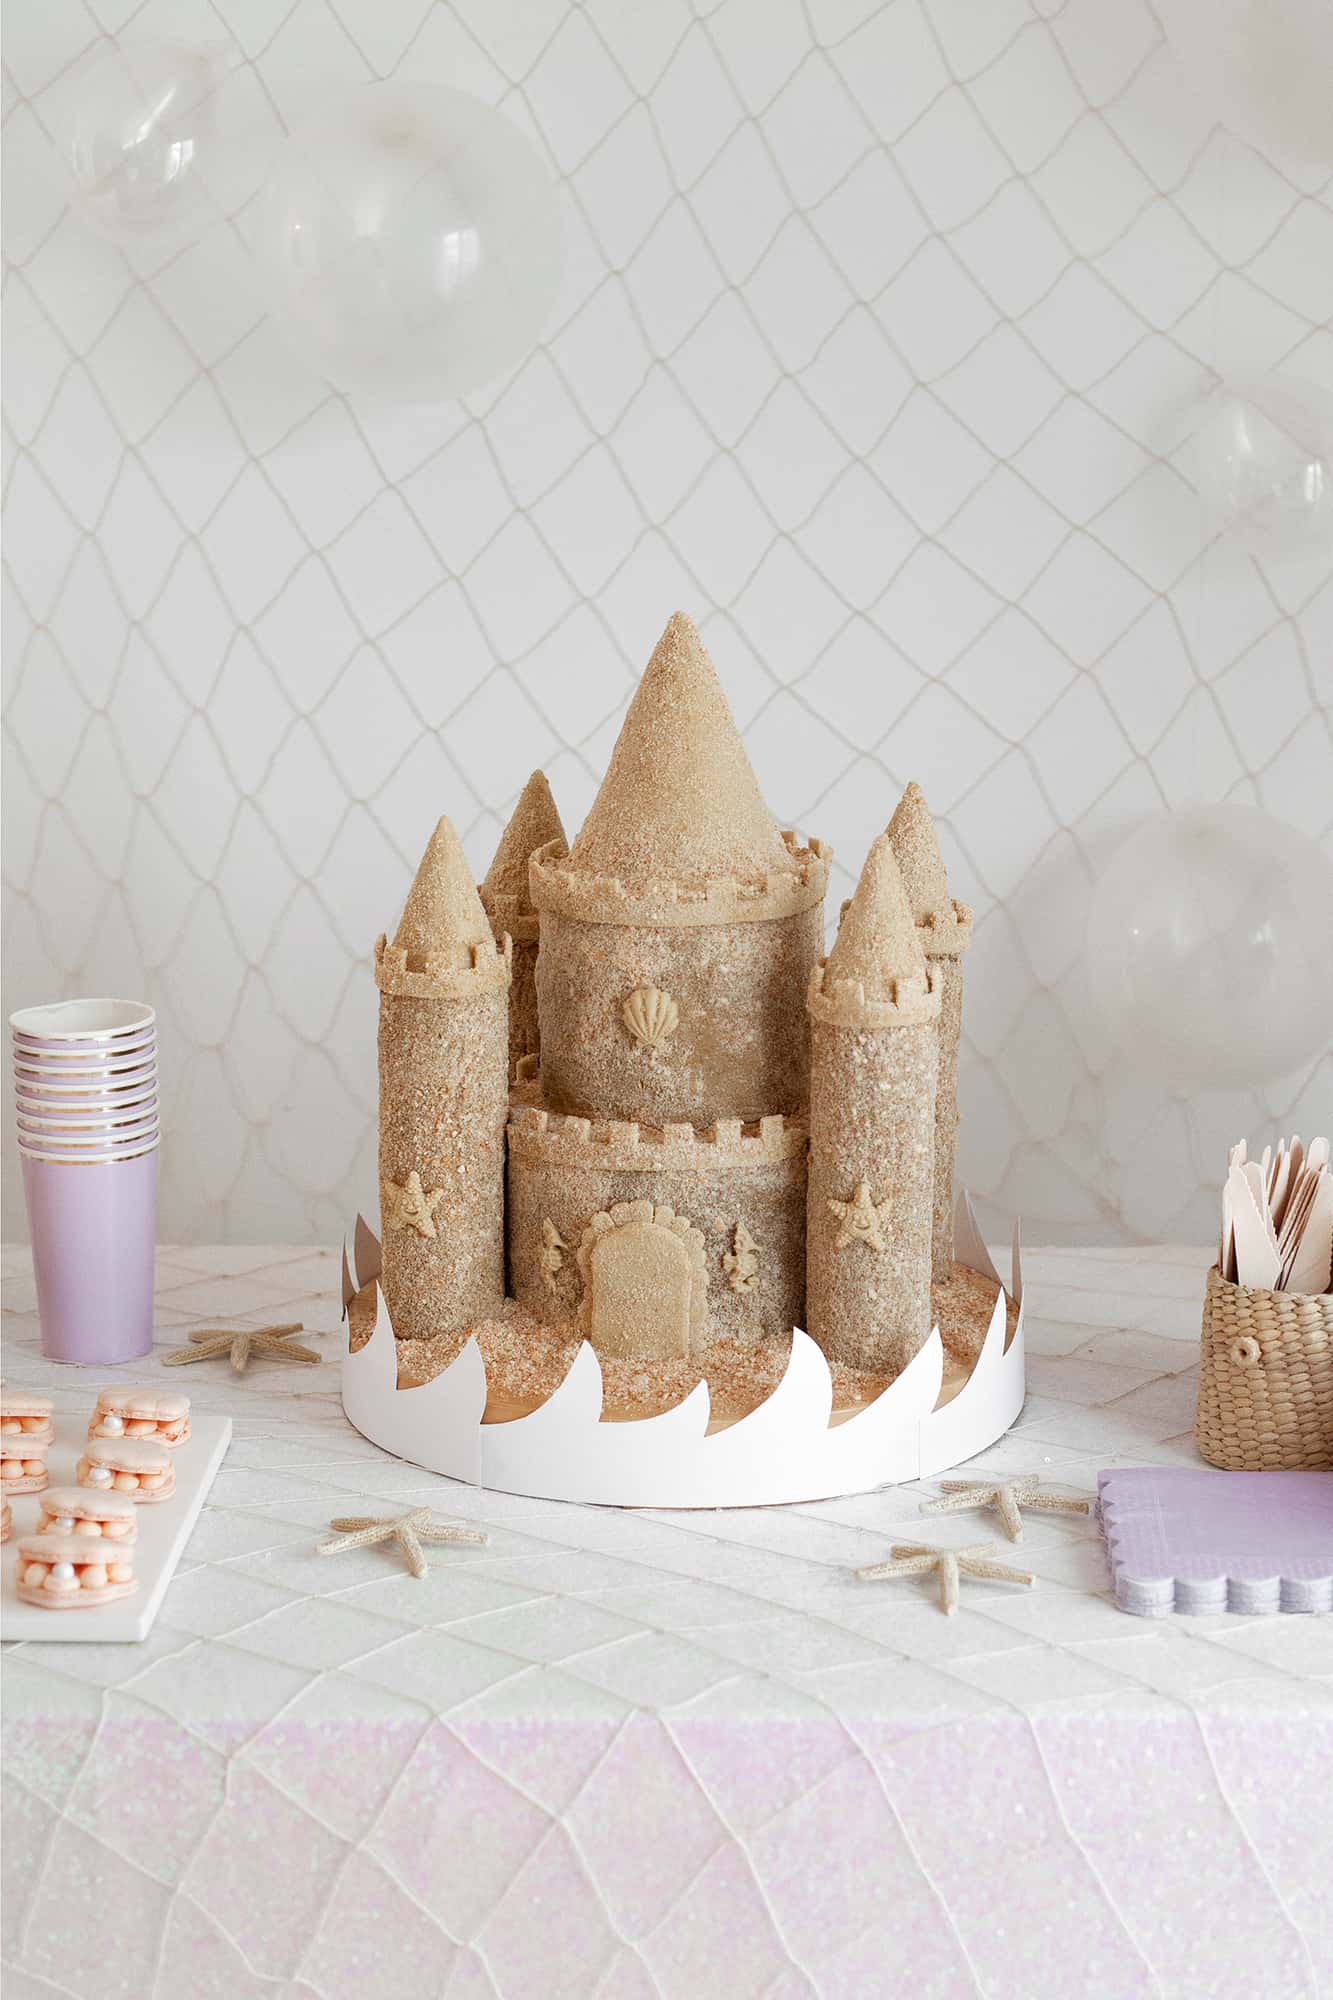 How to Make a Sandcastle Cake